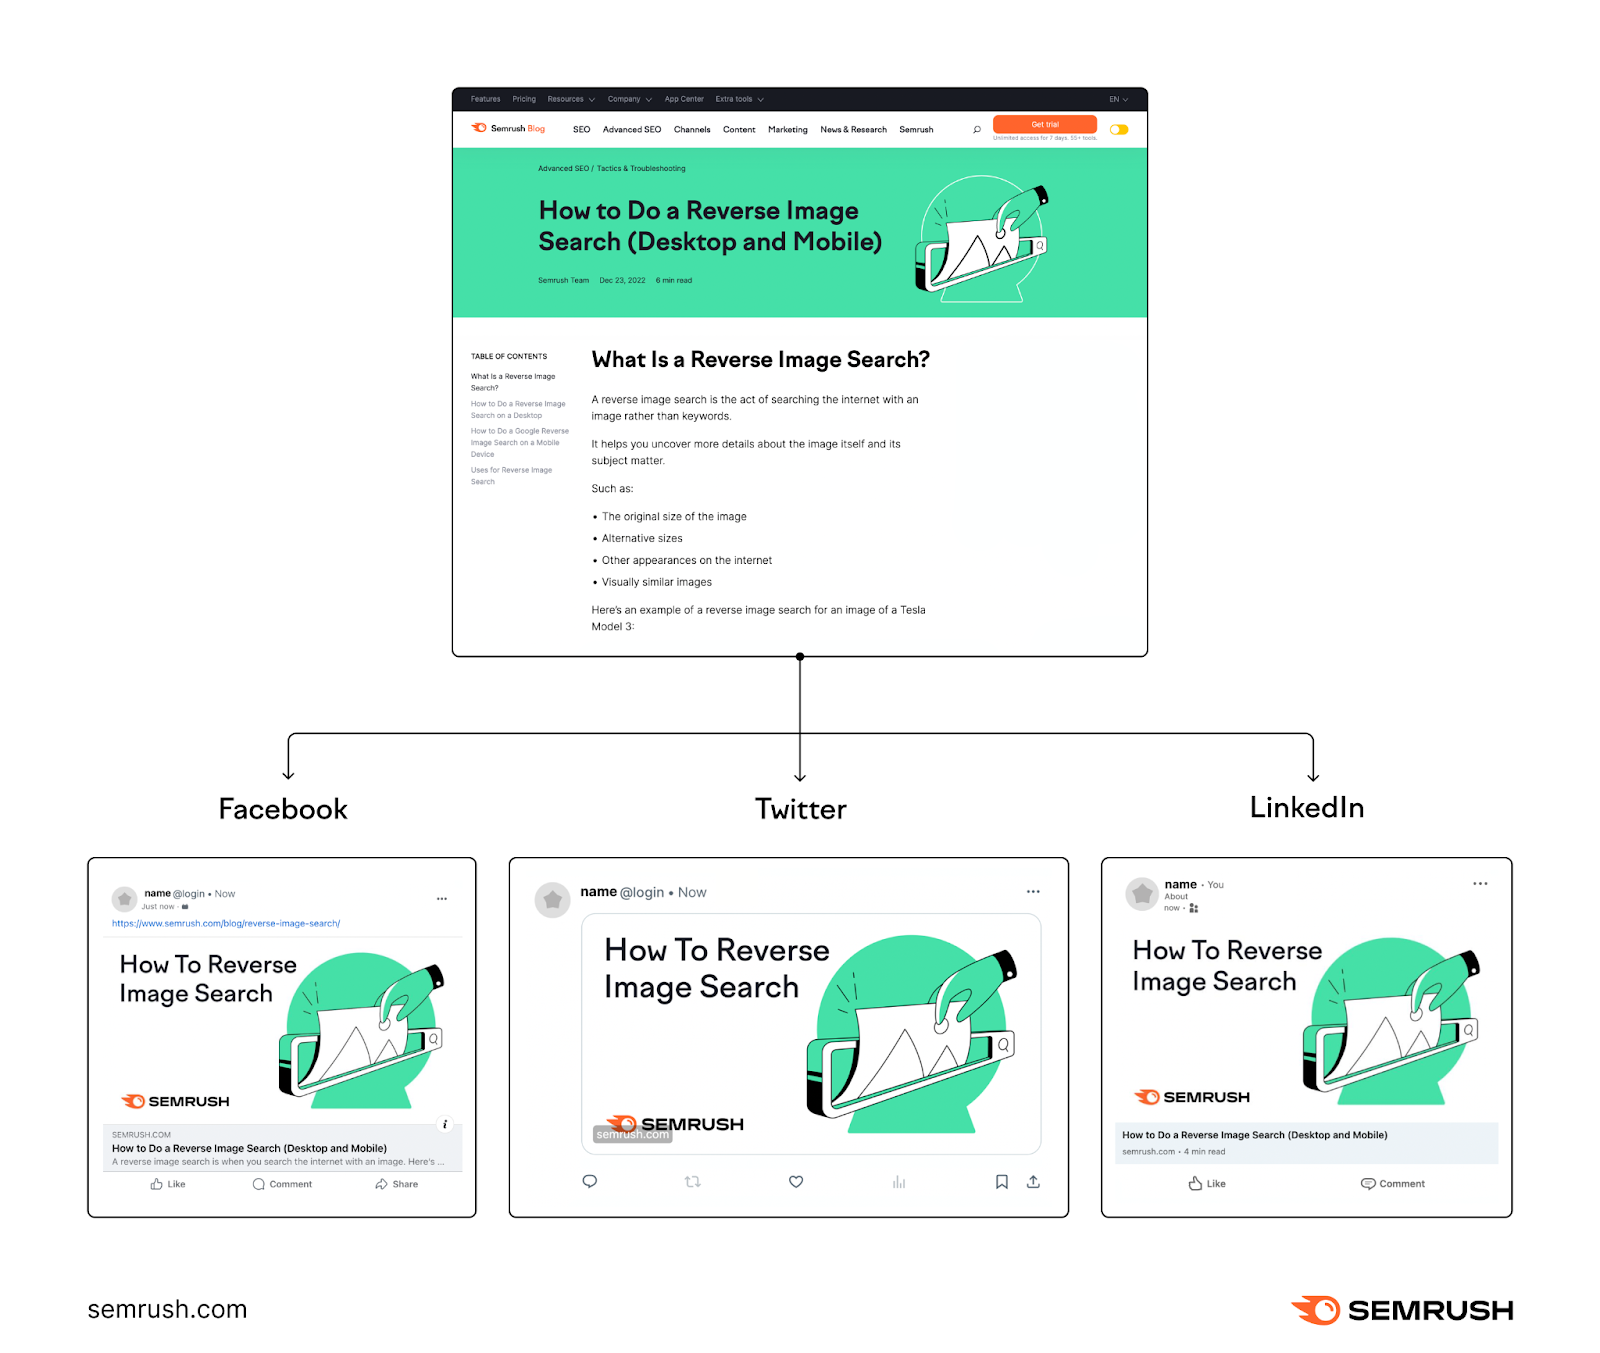 An infographic showing an article from Semrush on top, and how it would look like when shared on Facebook, Twitter and LinkedIn